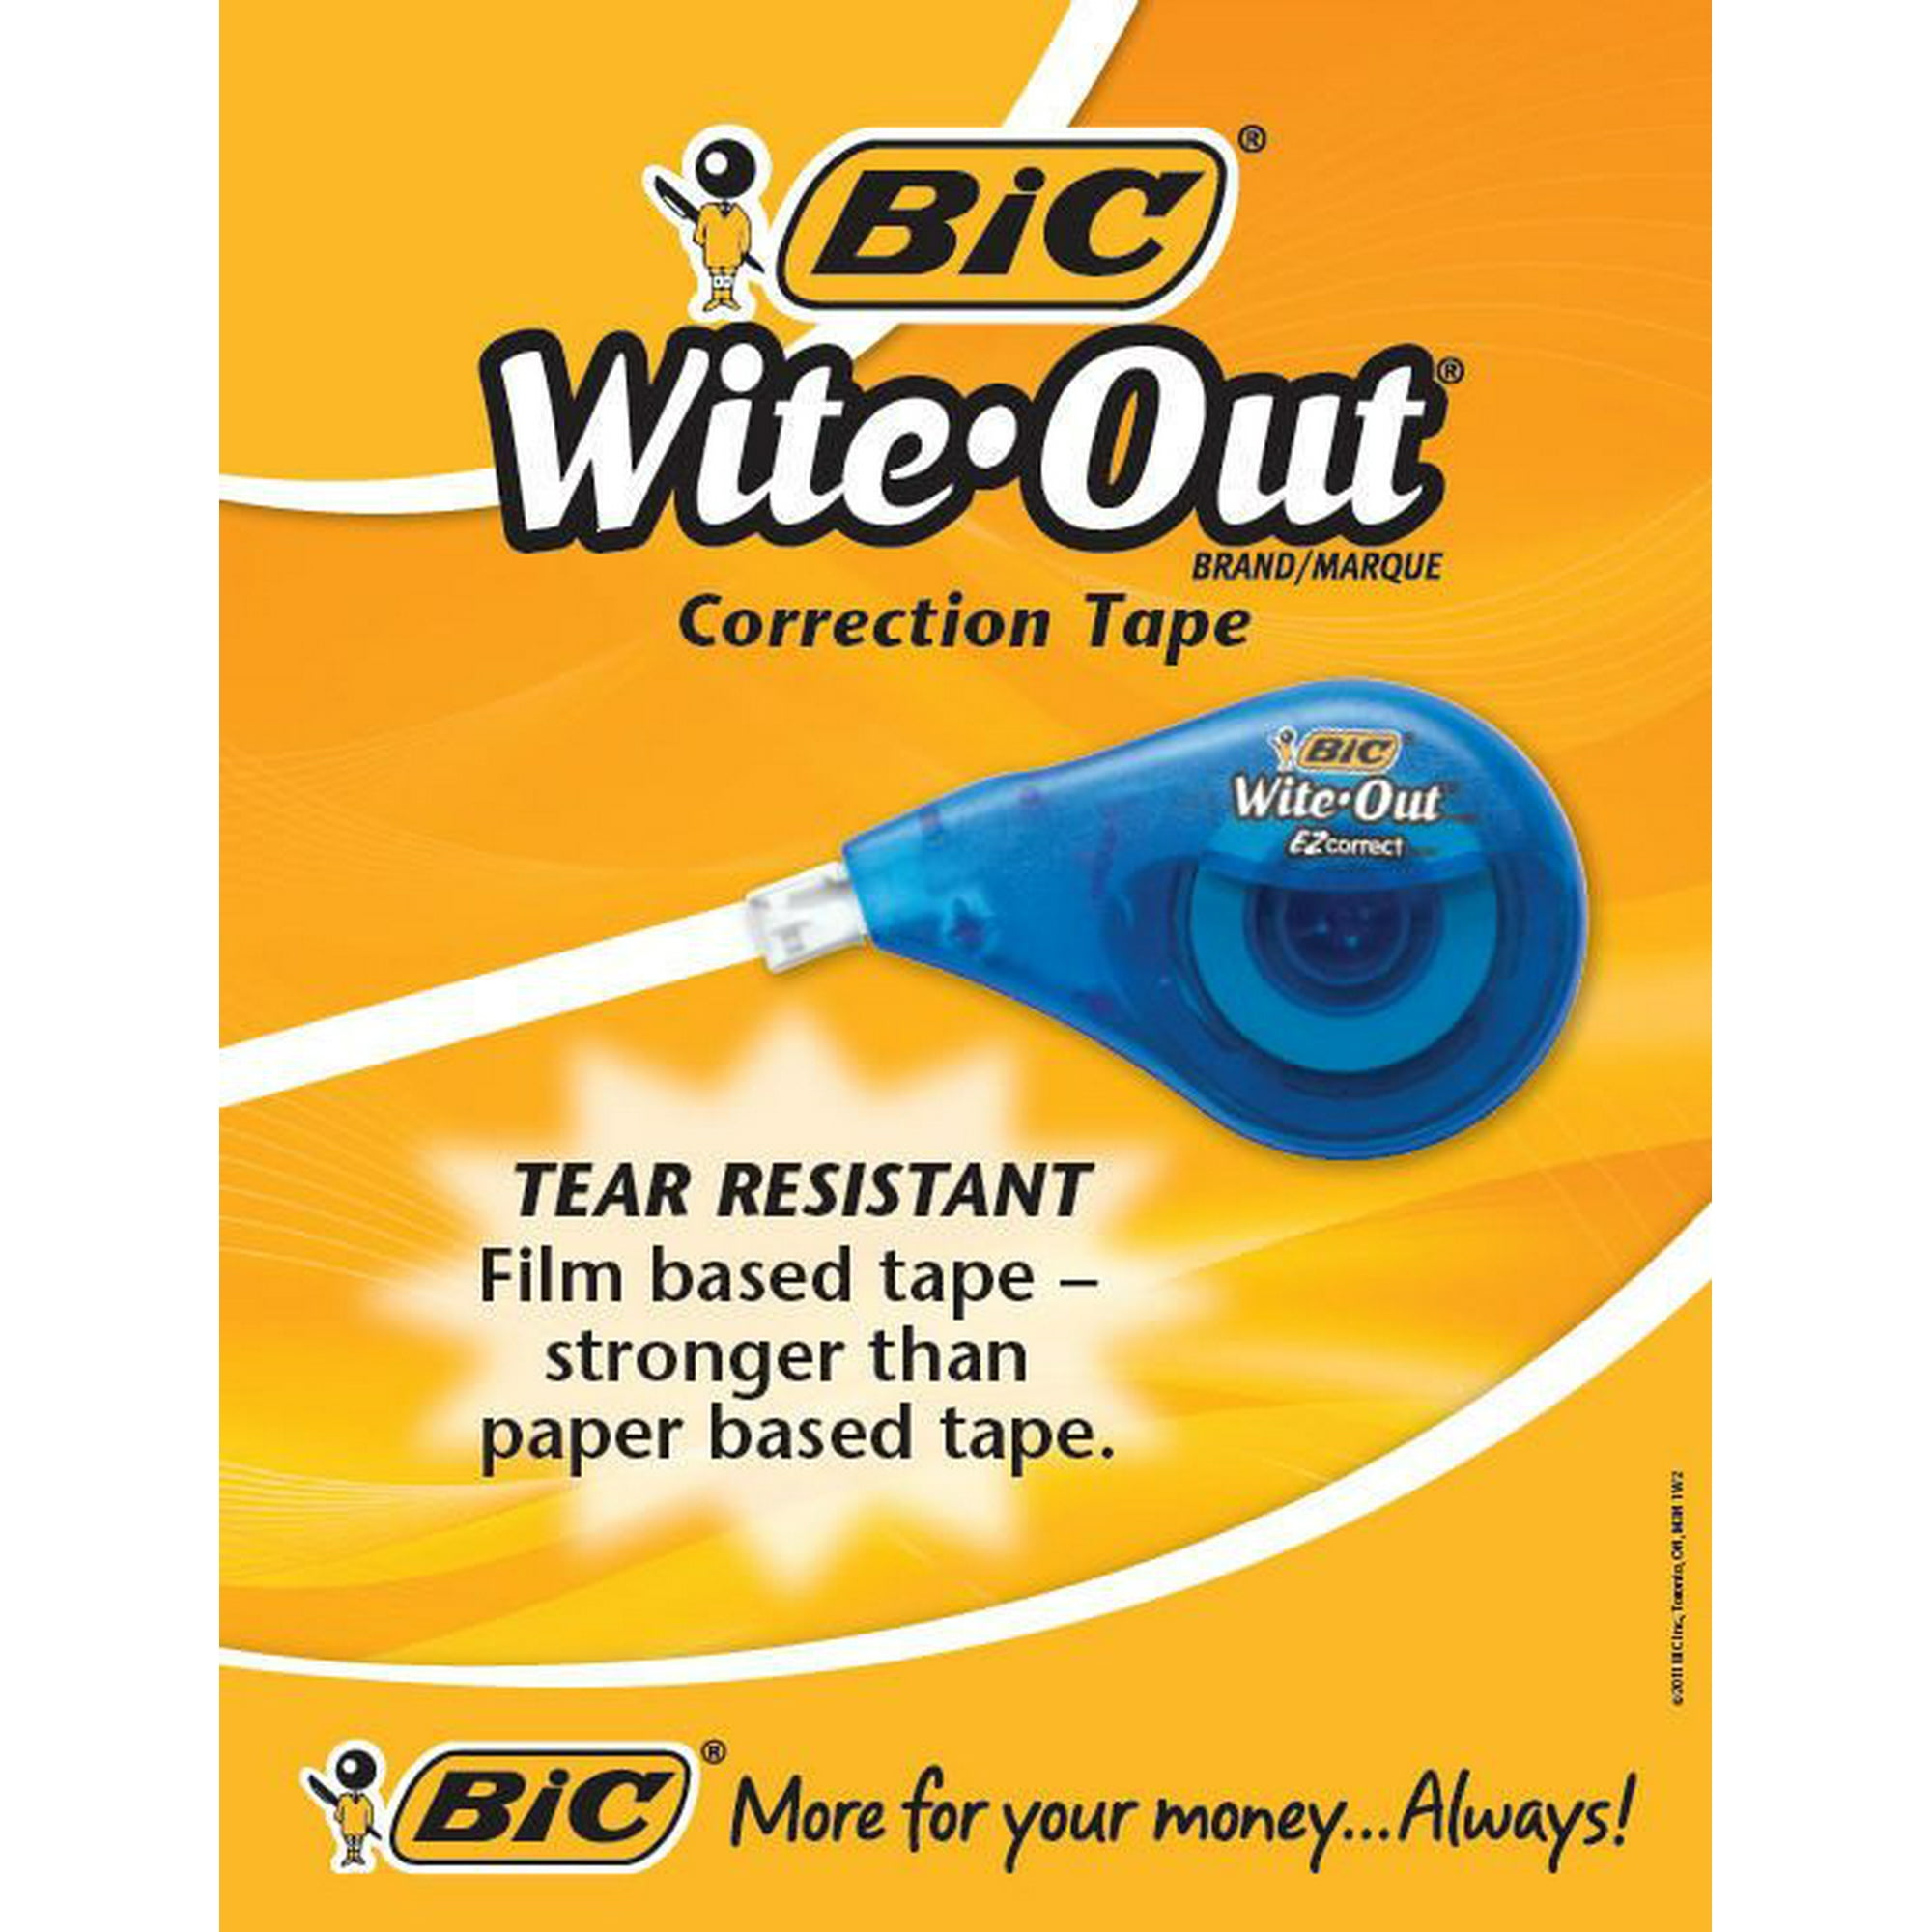 1952638 BIC WITE OUT CORRECTION TAPE 2 00 INSTANT SAVINGS EXPIRES